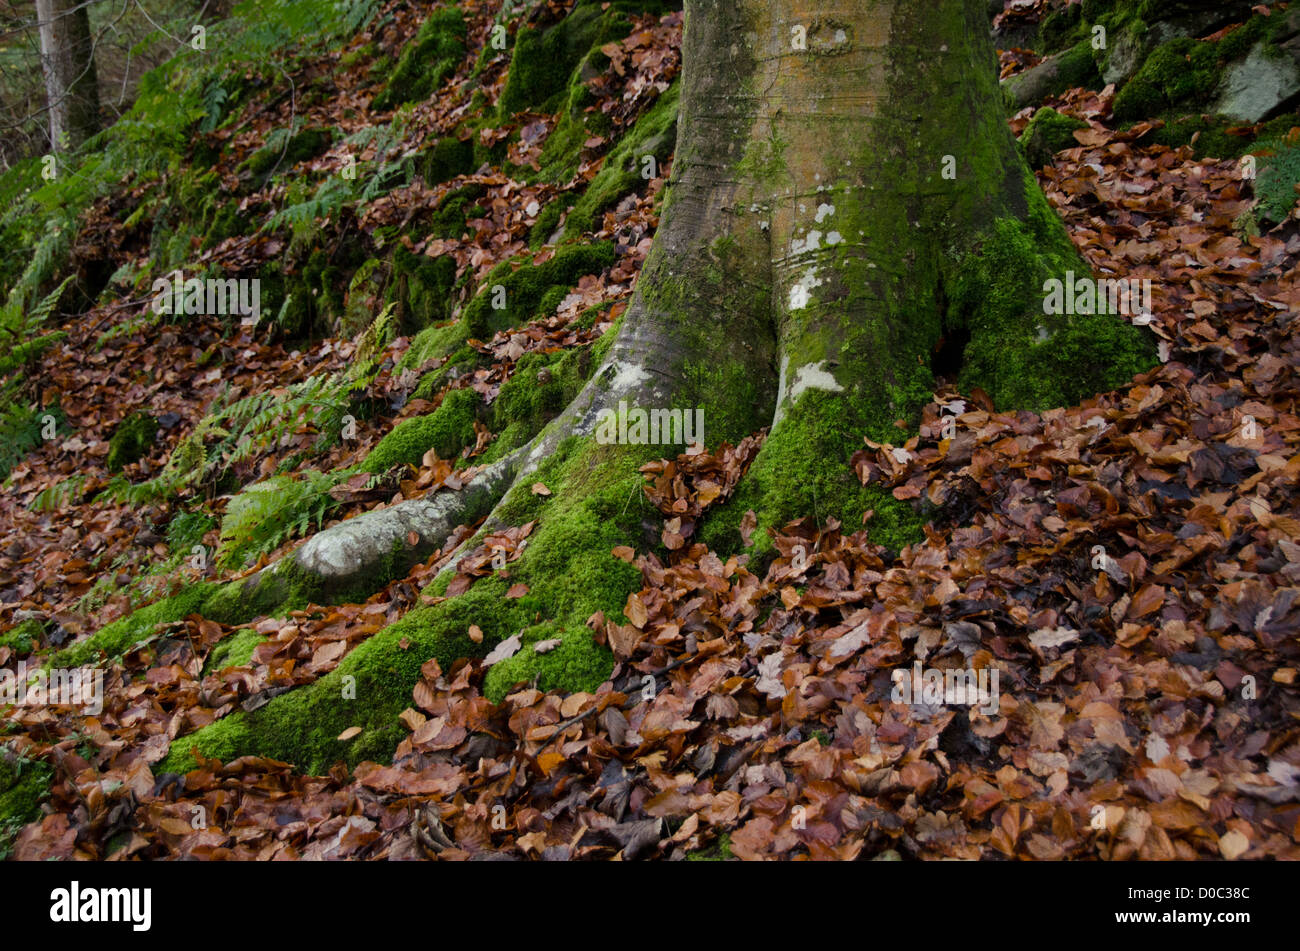 Close-up of trunk of beech tree growing on hillside, spreading roots covered in leaves & lichen - Bolton Abbey Estate, North Yorkshire, England, UK. Stock Photo